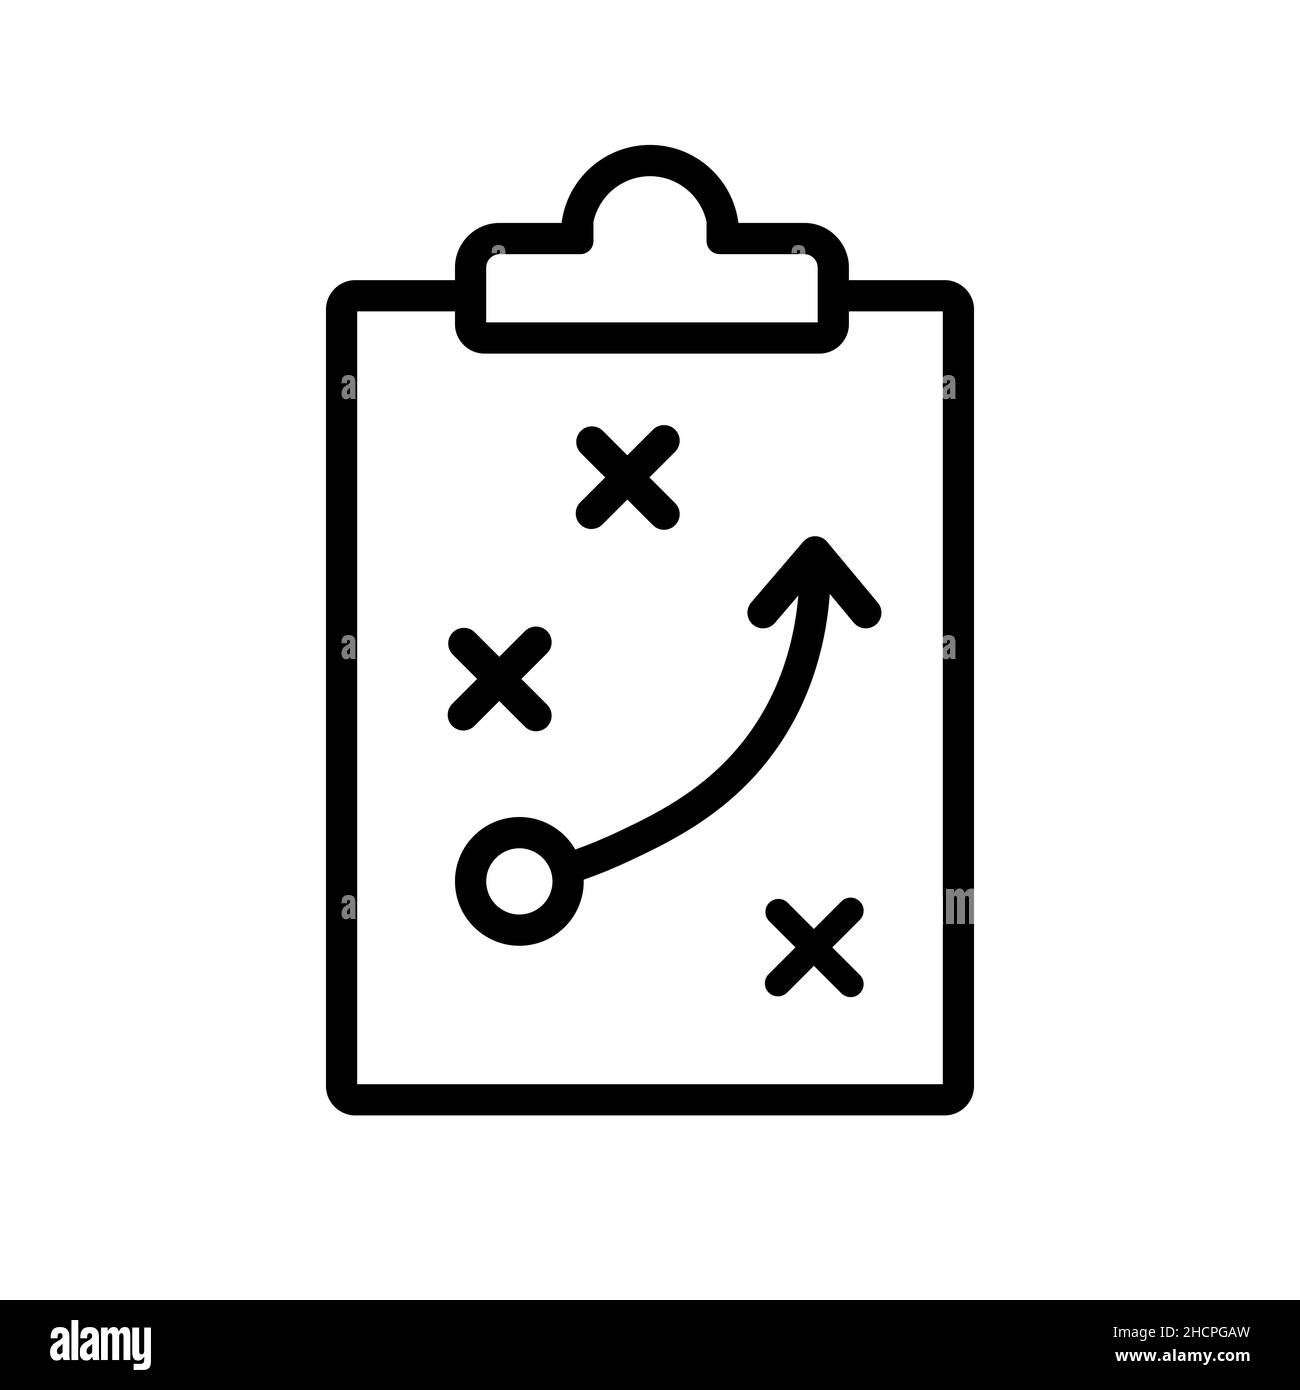 Strategy icon in flat style. Management line symbol in black. Success vector sign. Marketing plan concept. Simple abstract business tactic icon. Vecto Stock Vector